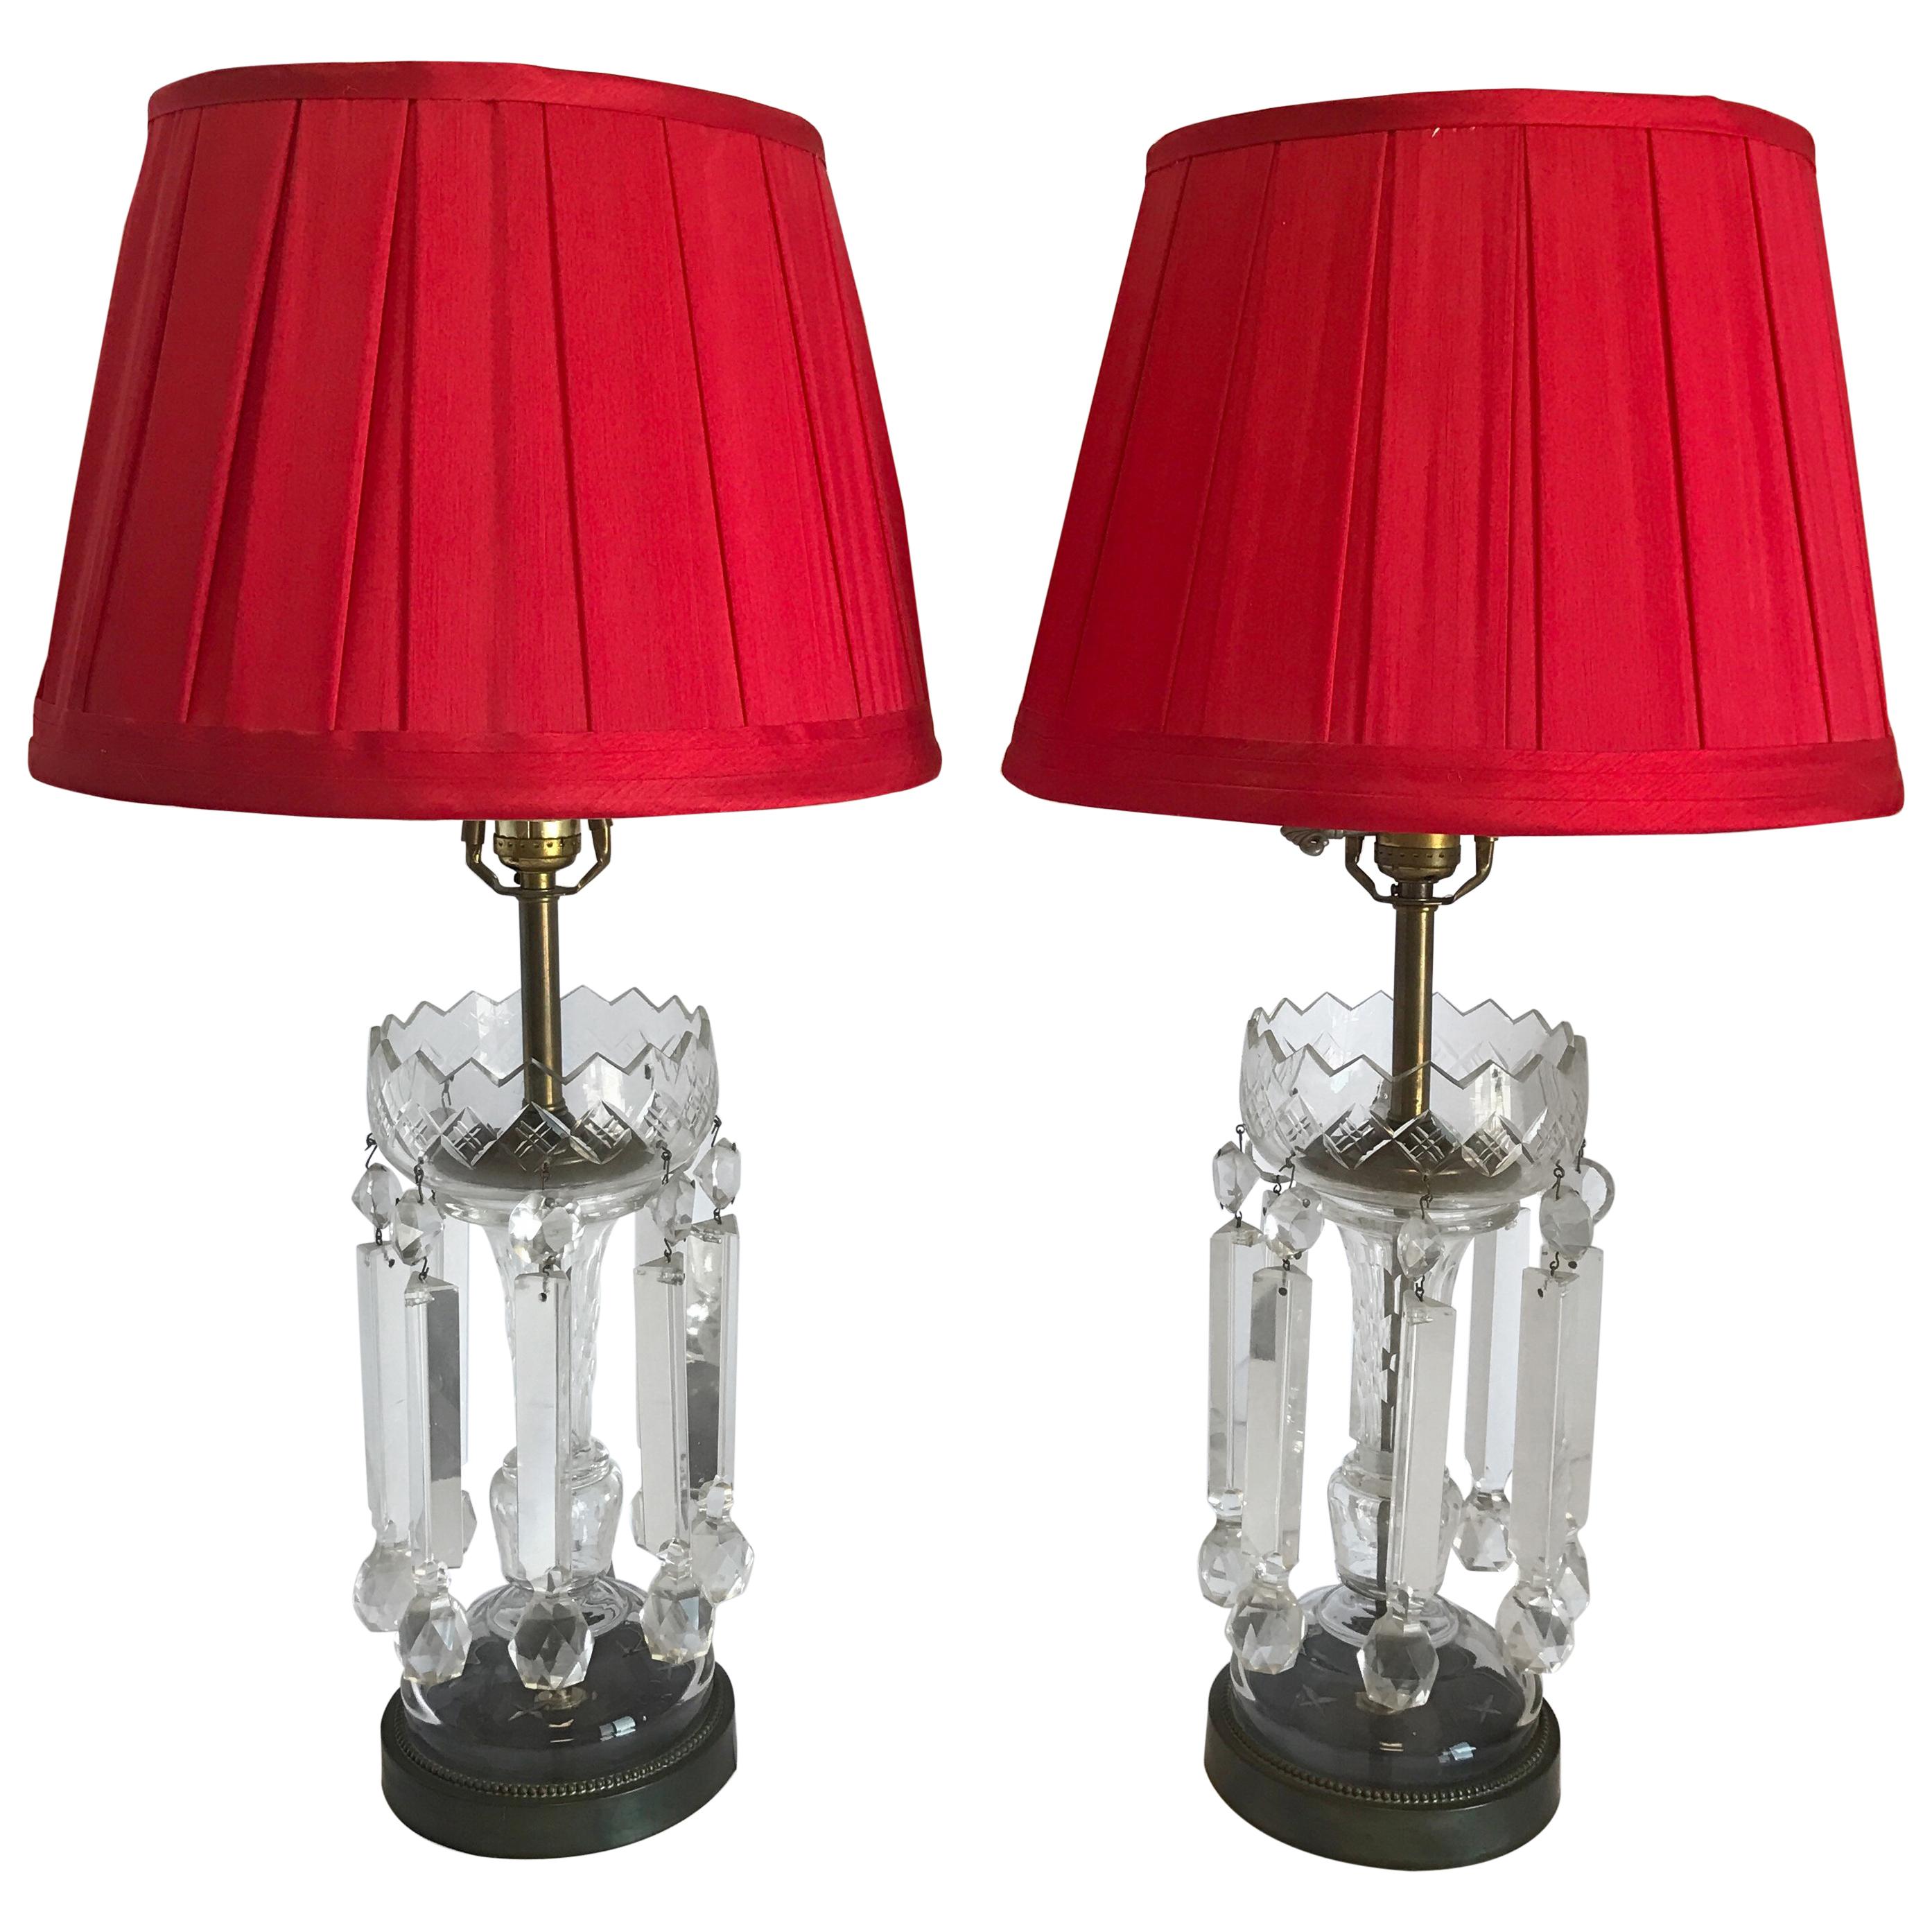 Pair of French Crystal Girandole Table Lamps with Red Shades